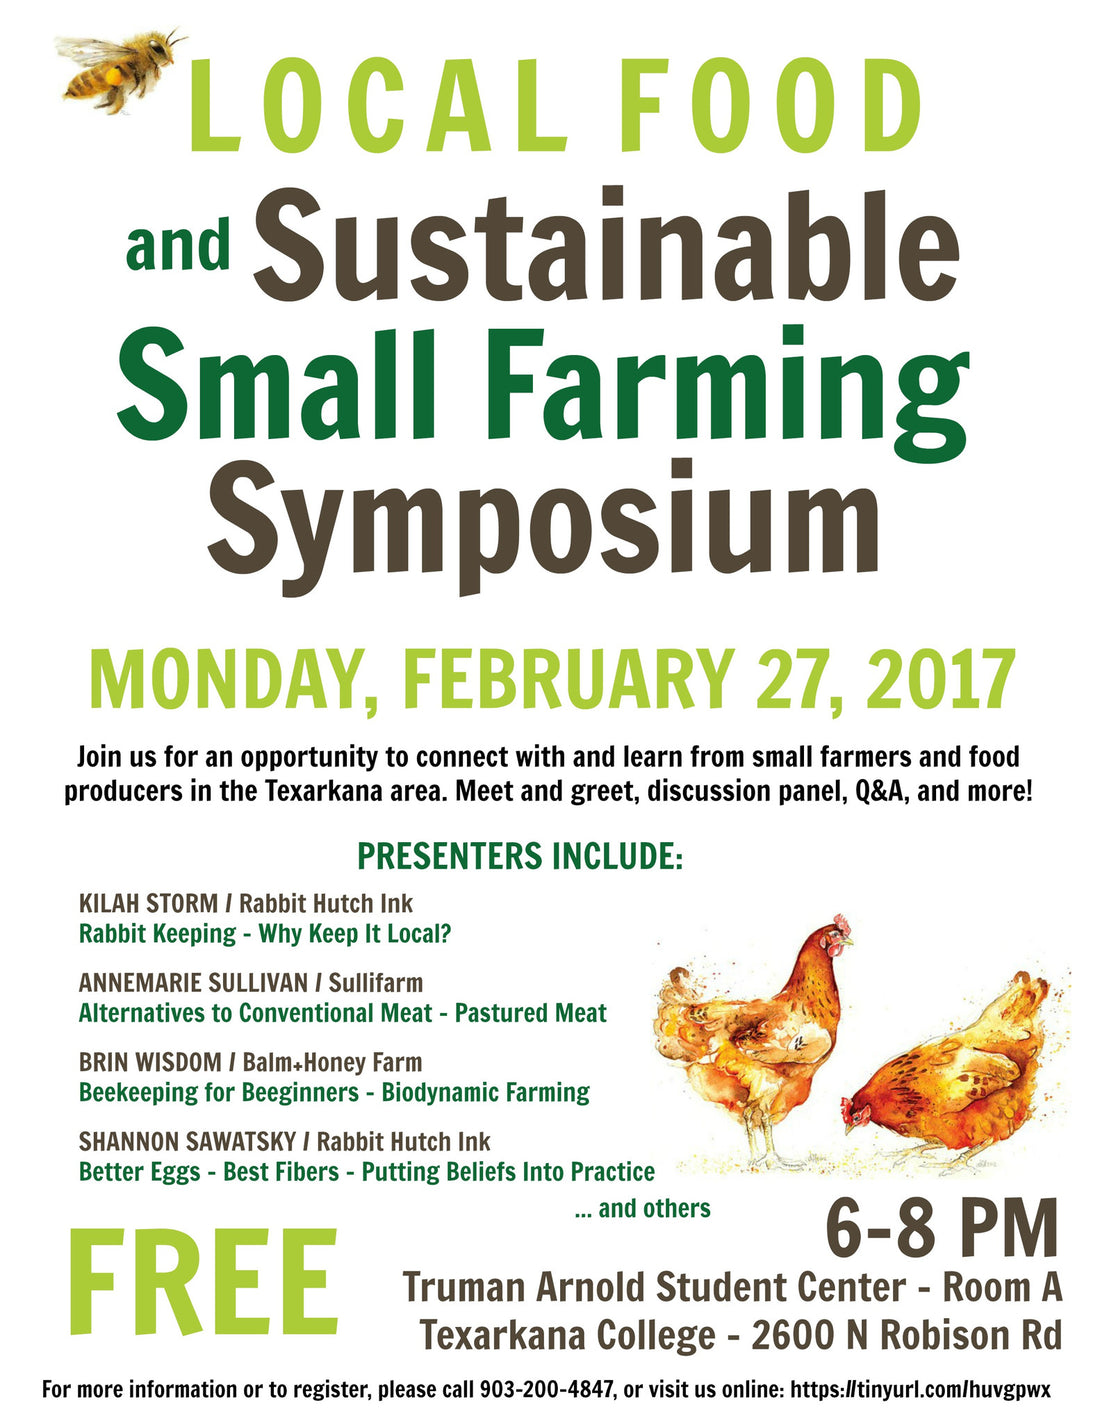 Local Food and Small Farming Symposium